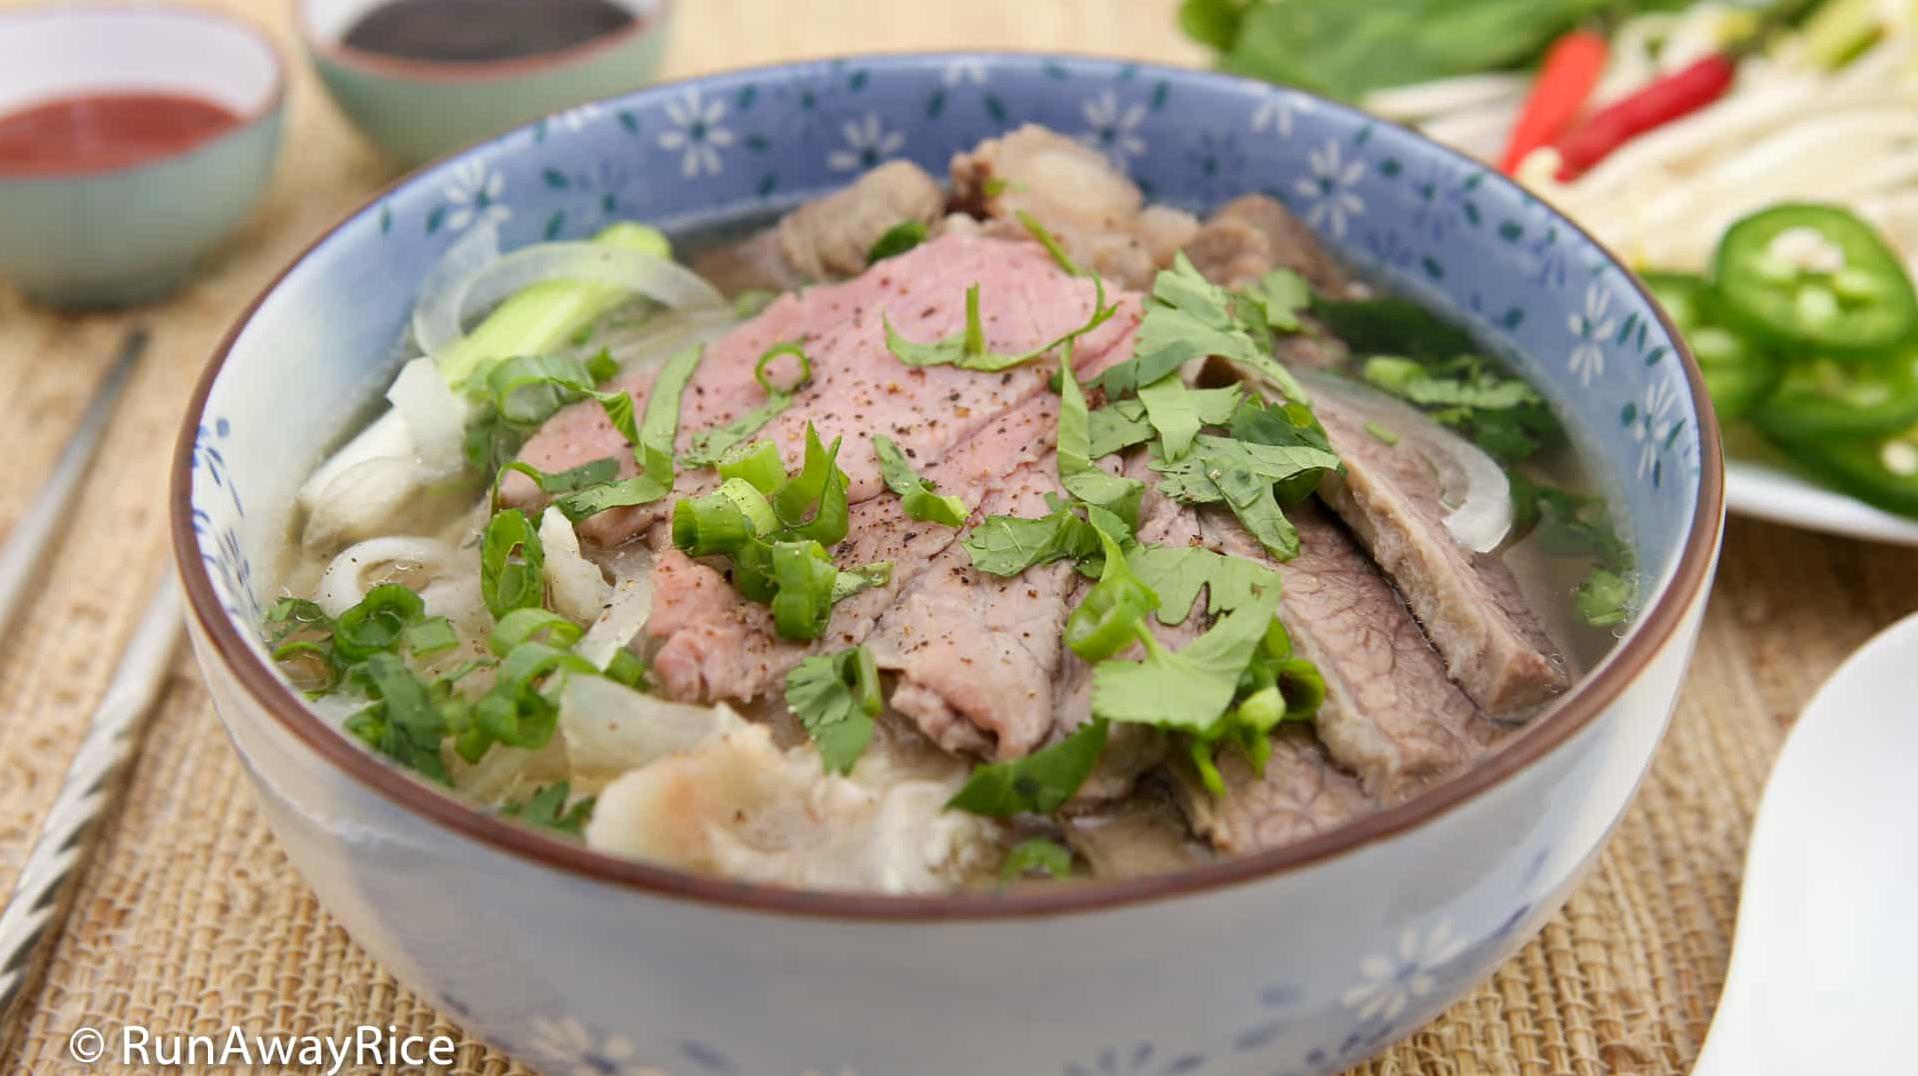  The secret ingredient to a good bowl of pho? Patience and slow cooking.